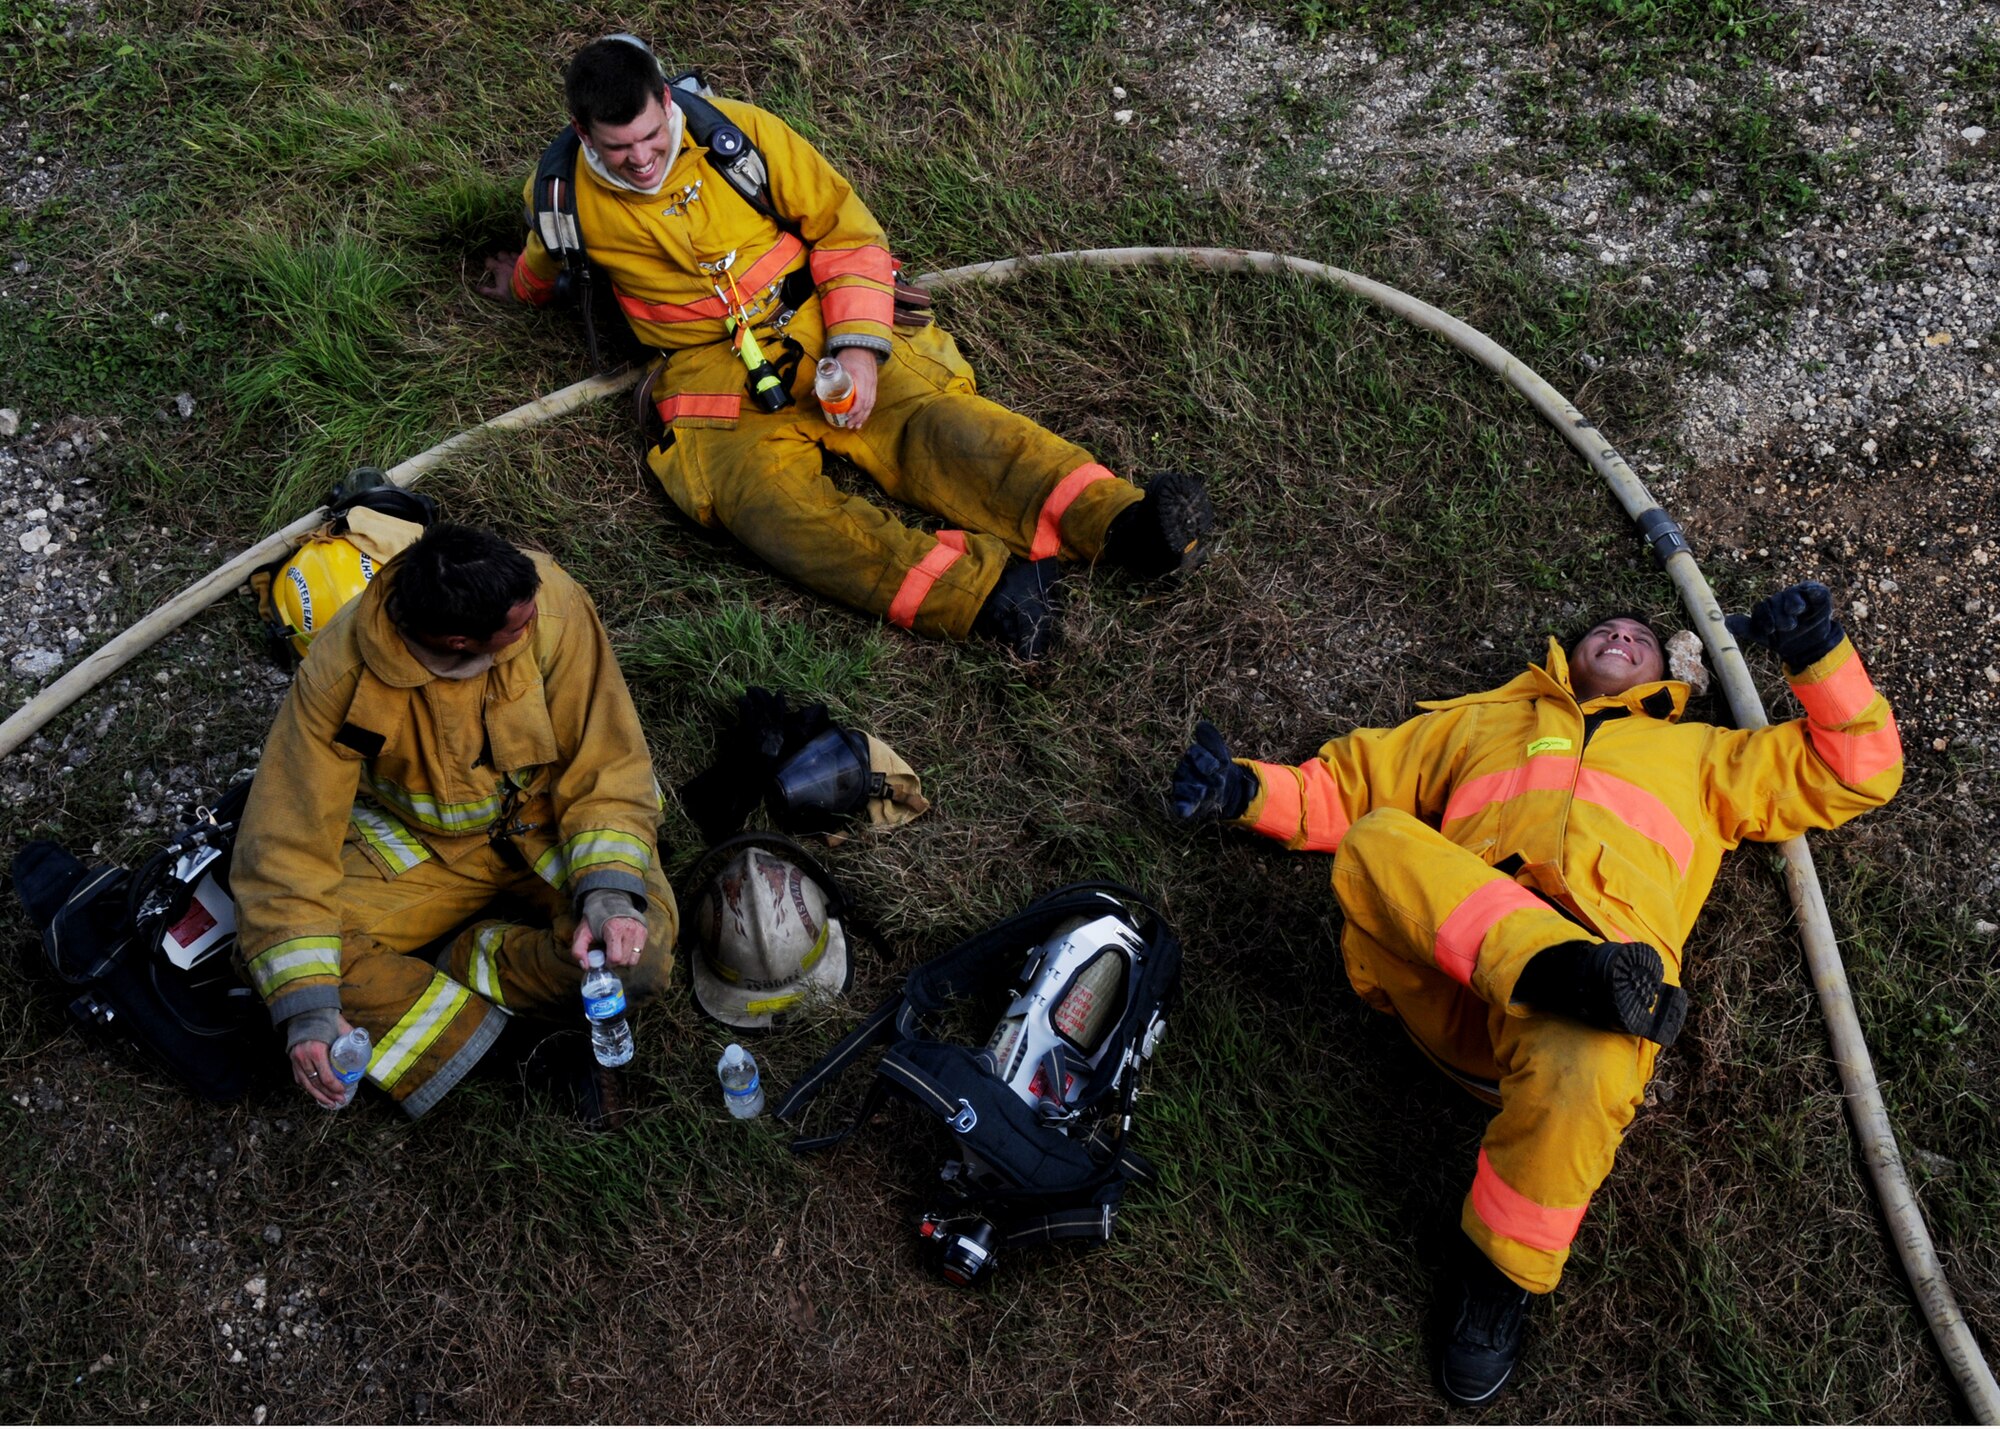 ANDERSEN AIR FORCE BASE, Guam - U.S. Navy Firemen relax under the shade after conducting Structural Fire Training here Nov. 22. Eight new Navy Fire Cadets and more than 54 seasoned firemen took part in the week long training to meet  certification and re-certification requirements. (U.S. Air Force photo by Senior Airman Nichelle Griffiths)